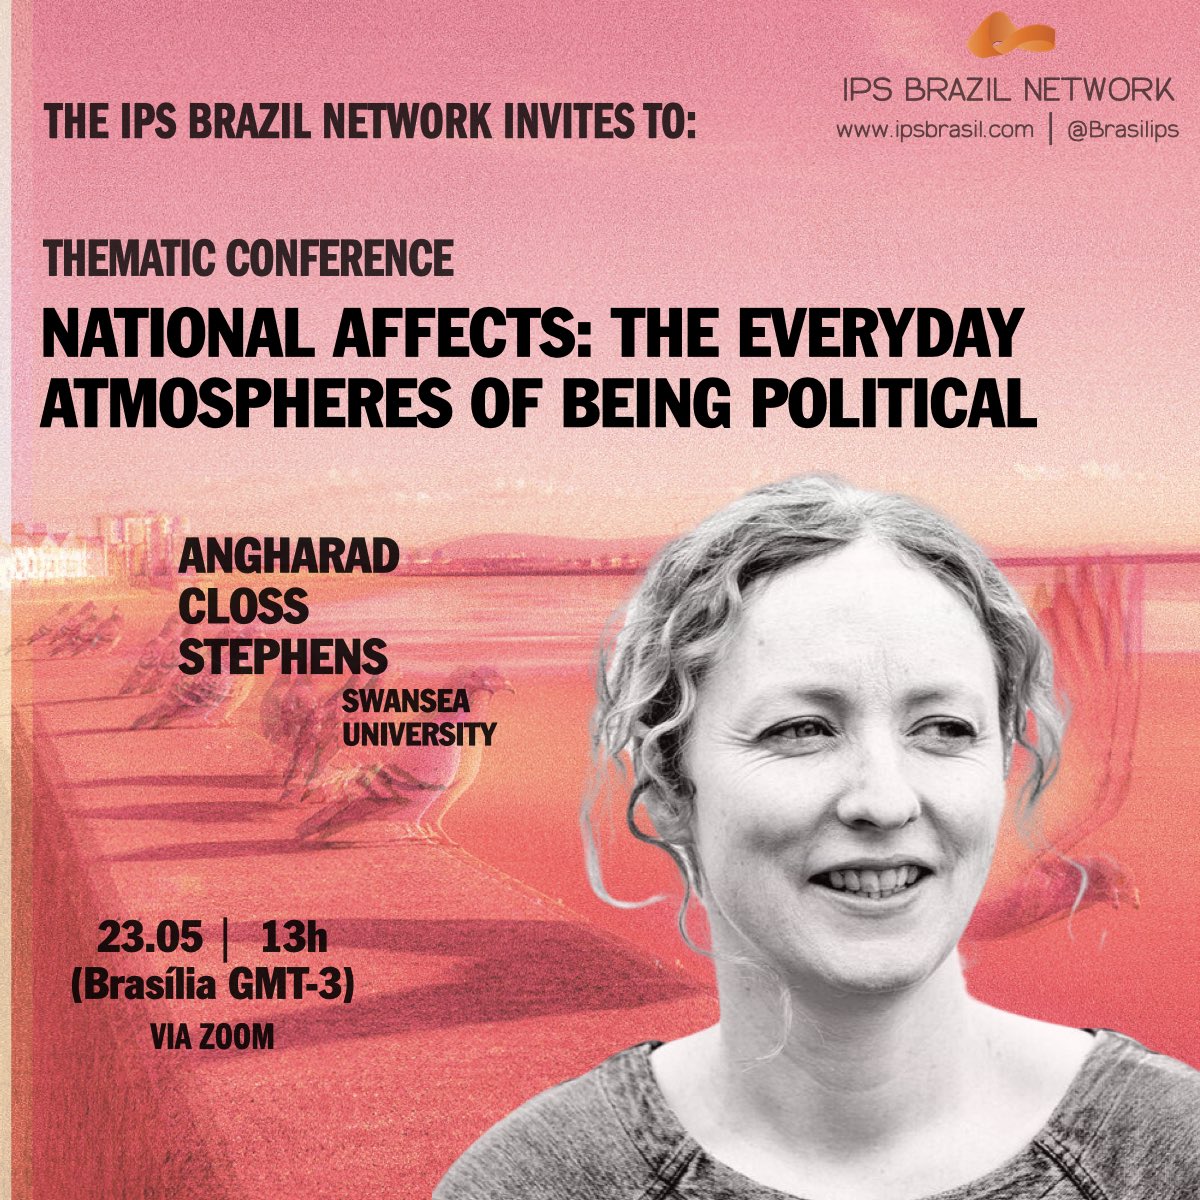 The IPS Brazil Network is pleased to invite to the Conference 'National Affects: The Everyday Atmospheres of Being Political' with Angharad Closs Stephens (Swansea University). The conference will take place on 23 May at 1pm (GMT-3) via Zoom. Registration: forms.gle/zo31u7auPmNxPx…